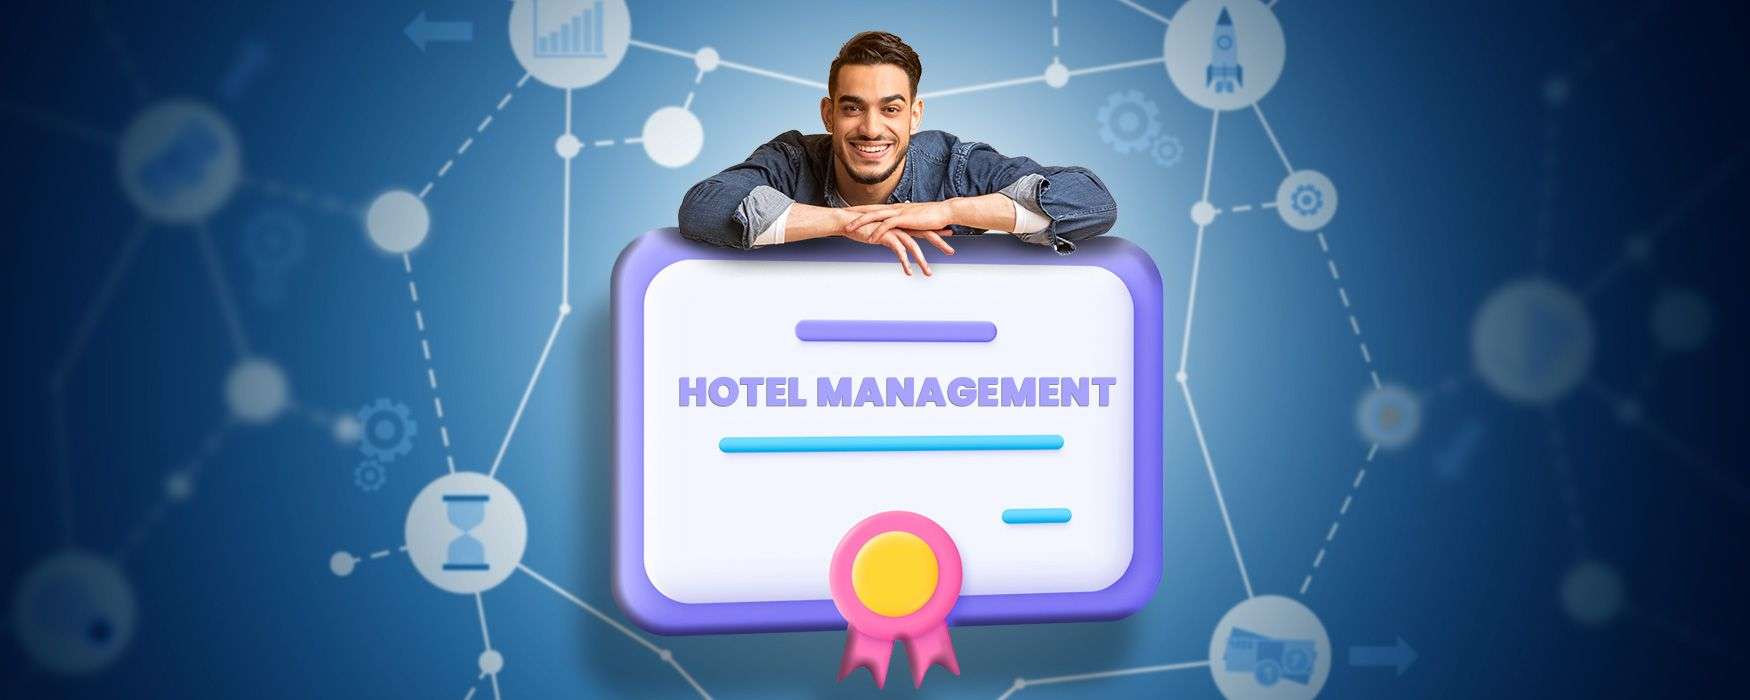 Diploma-in-Hotel-Management.jpg